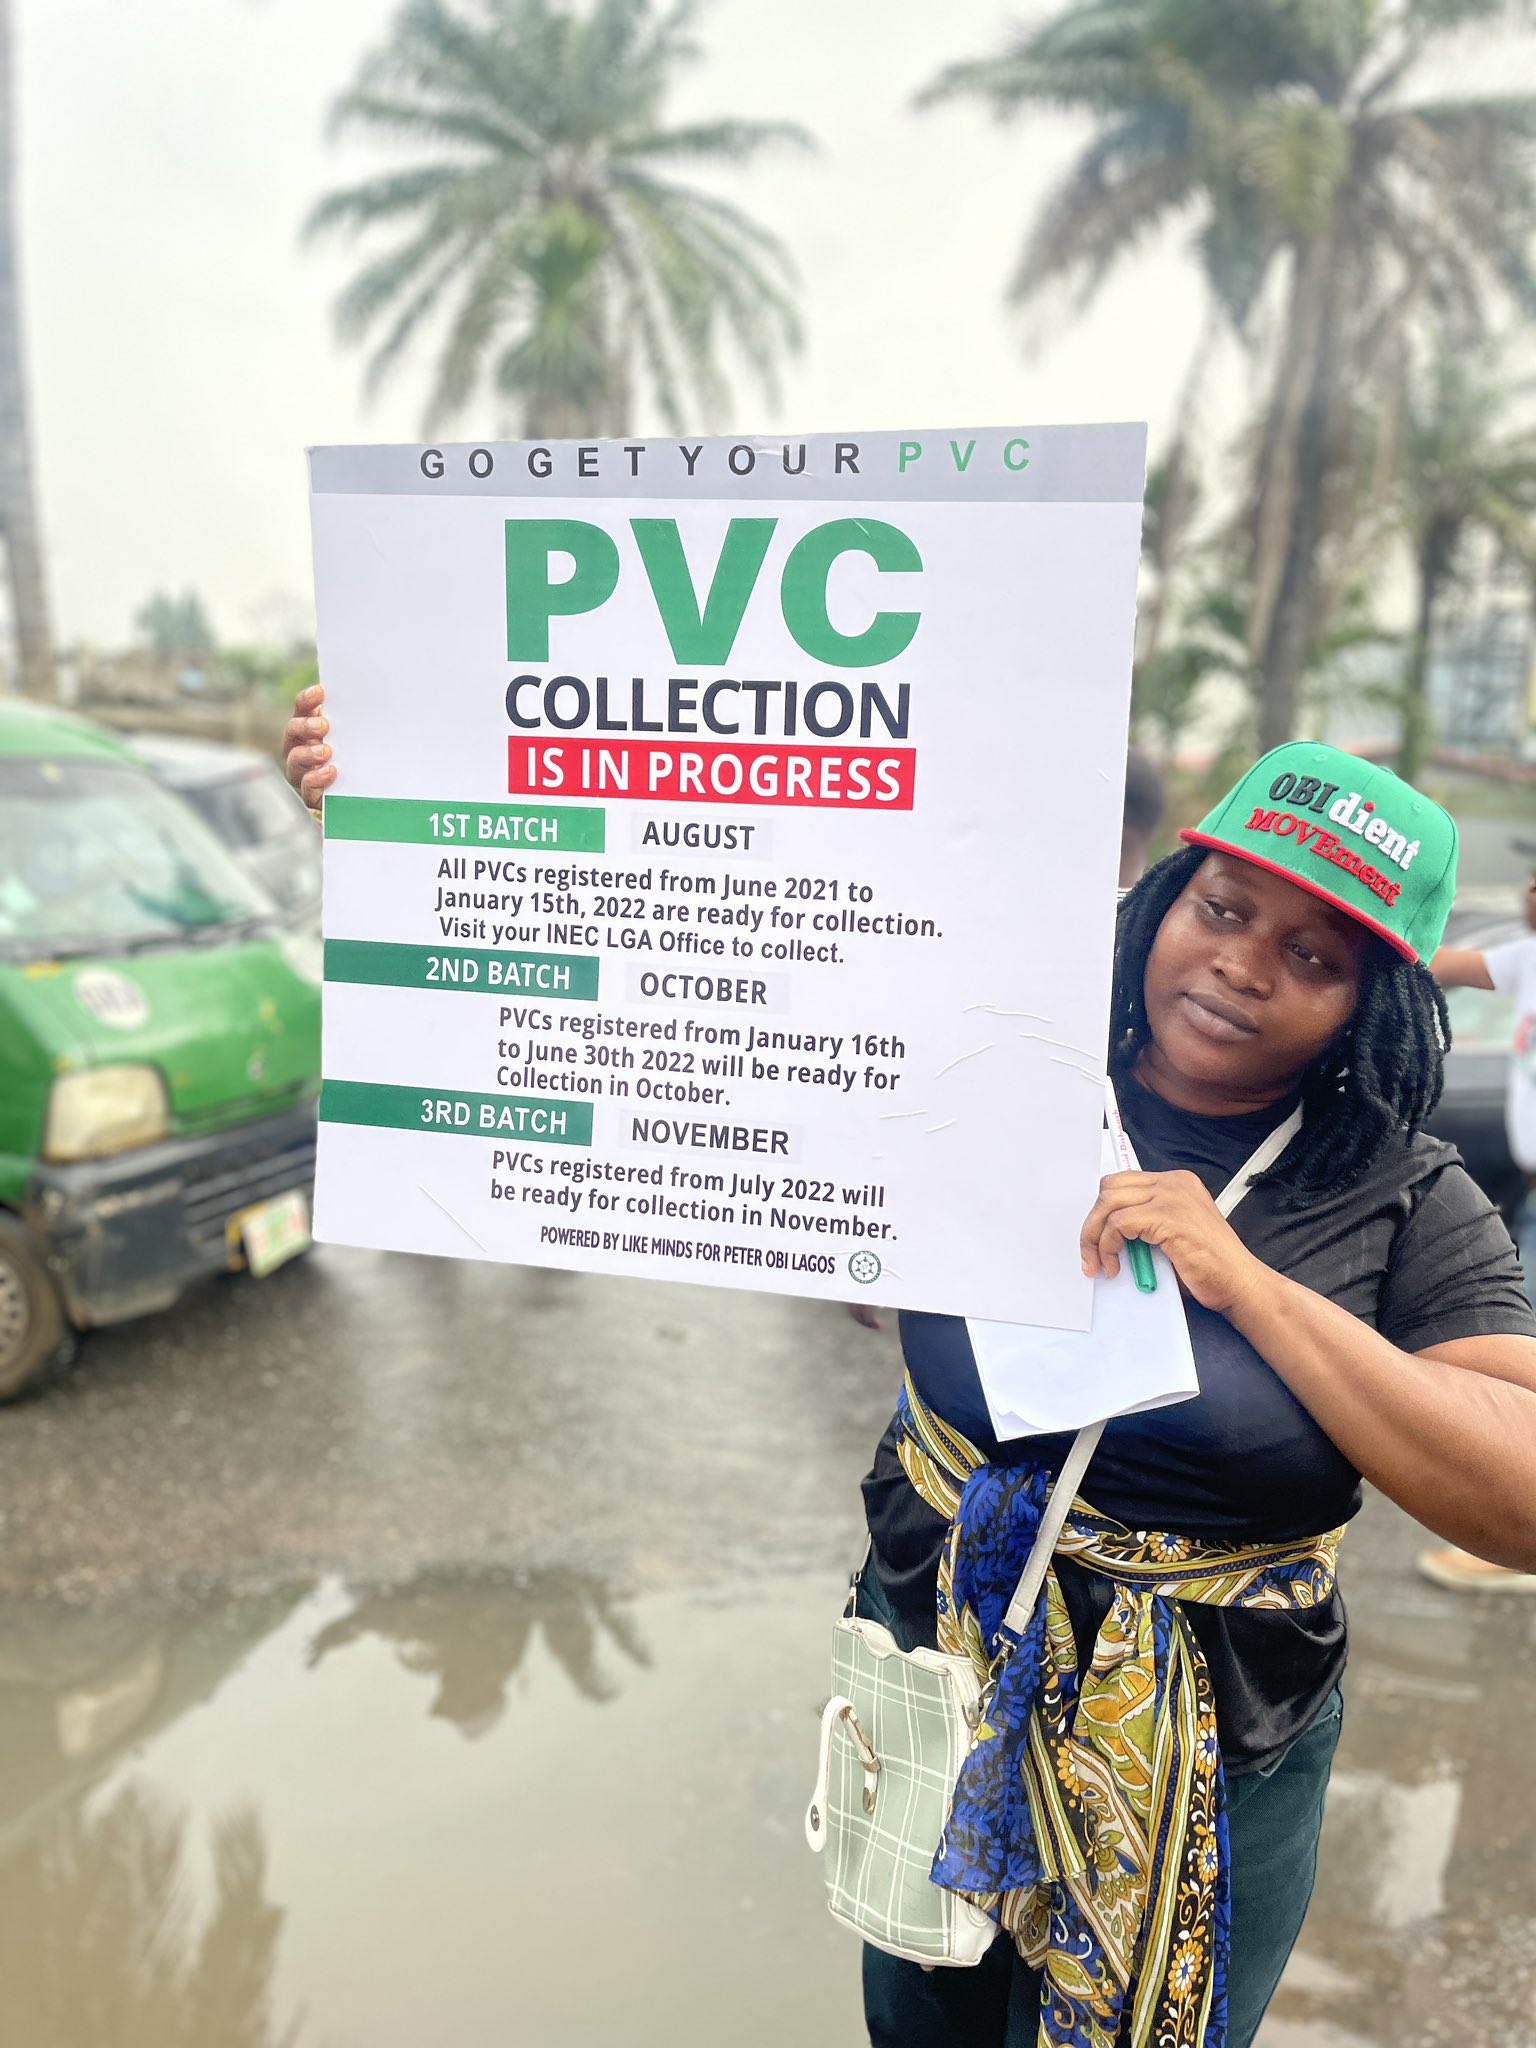 50 pictures from today's Lagos rally for Peter Obi - #4MillionMarchForObiDatti